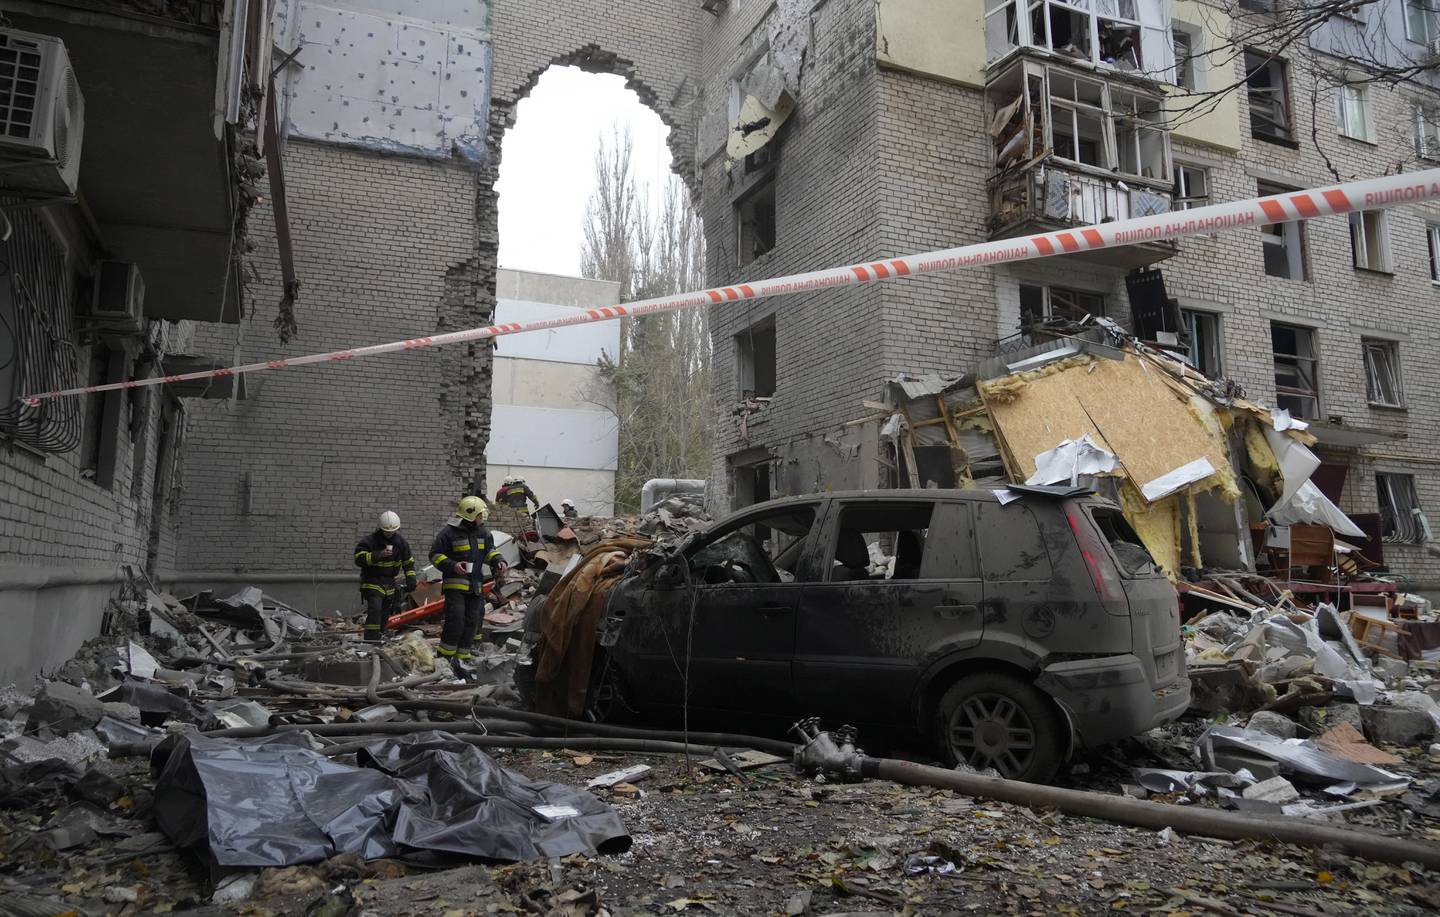 Ukrainian emergency service rescuers at the scene of a building damaged by shelling overnight in Mykolaiv. AP